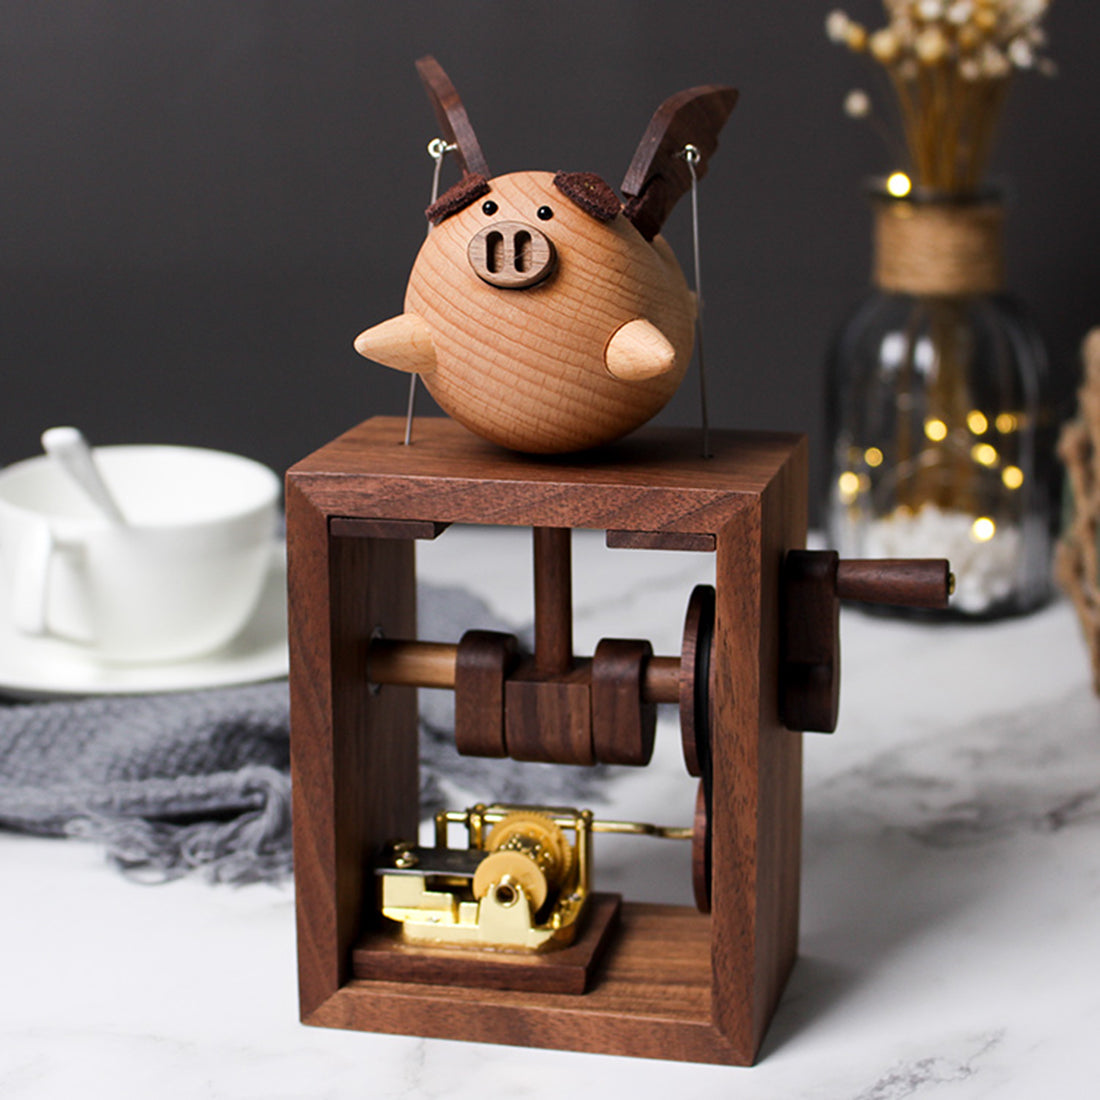 Automata Creative Music Box Cute Flying Pig Wooden Dynamic Musical Box Gift for Girls